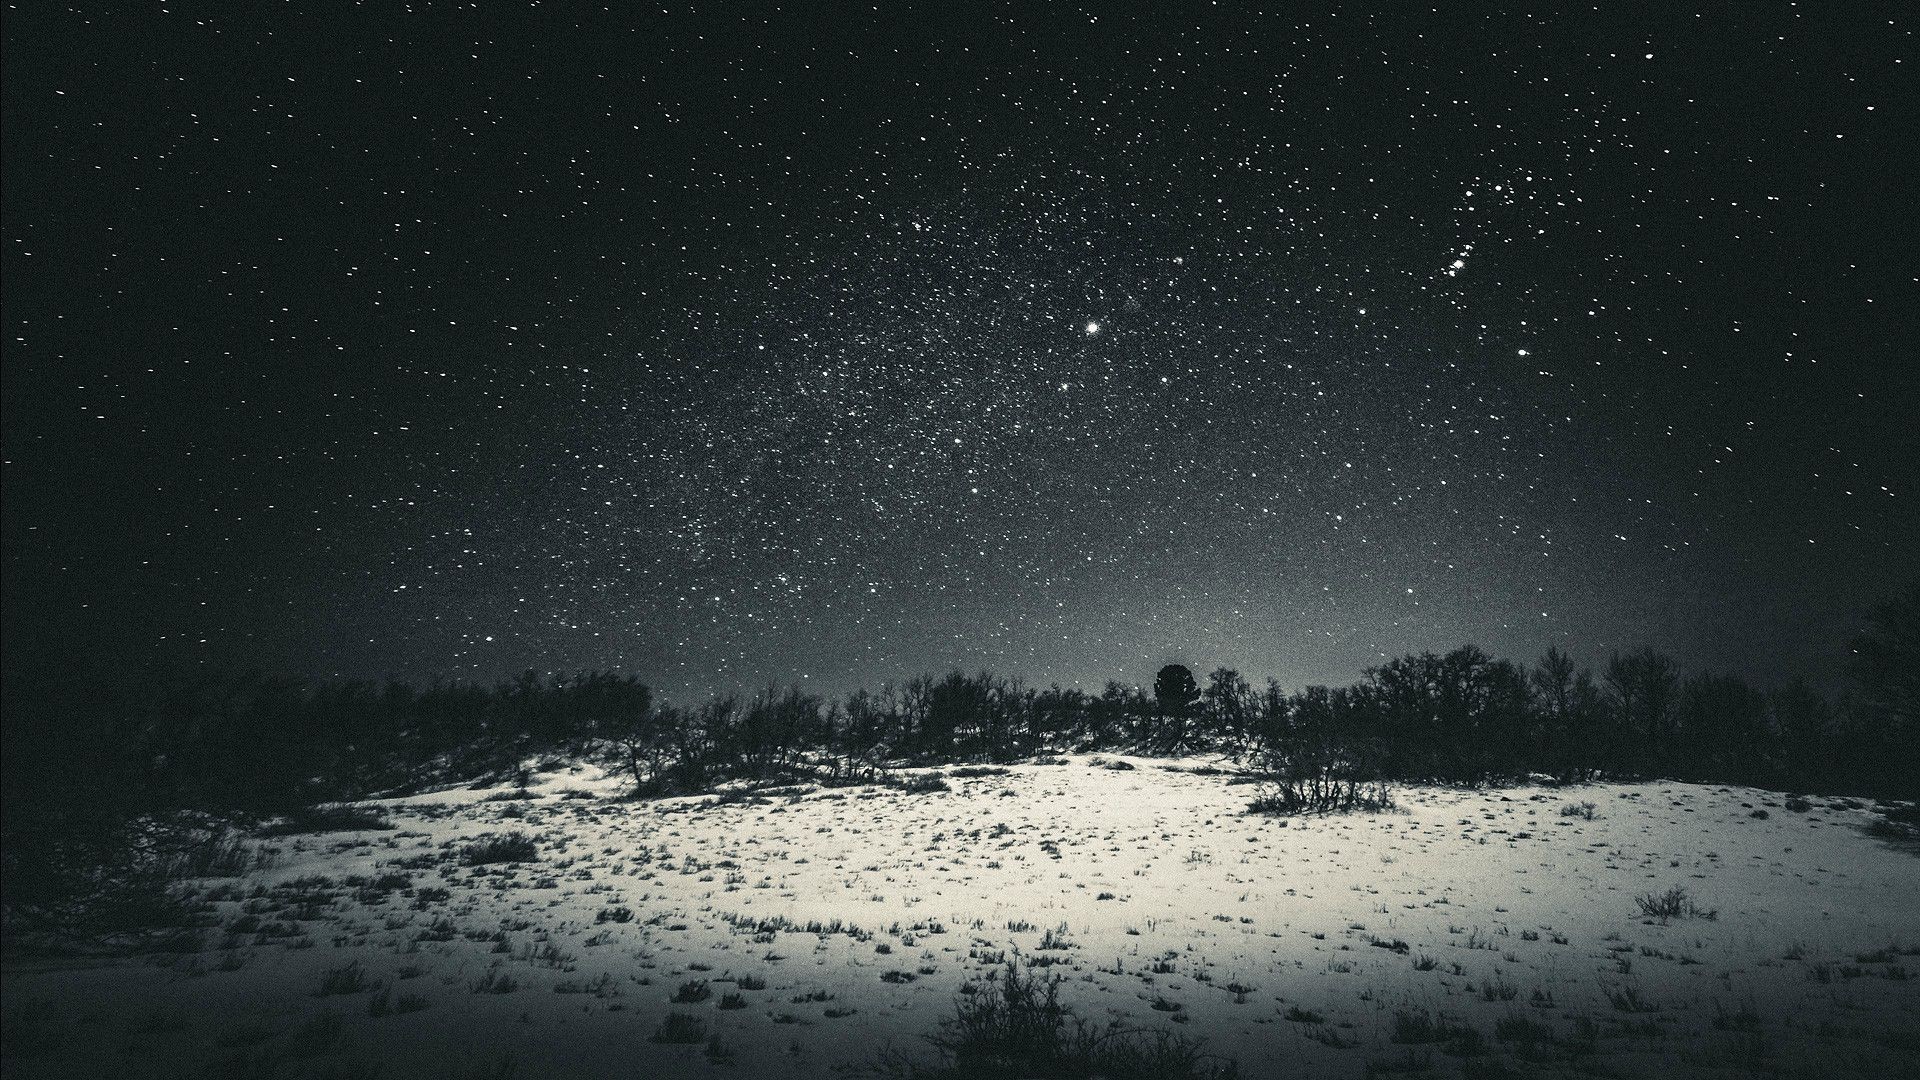 General 1920x1080 snow stars forest clearing nature landscape star trails night sky dark black trees monochrome gray